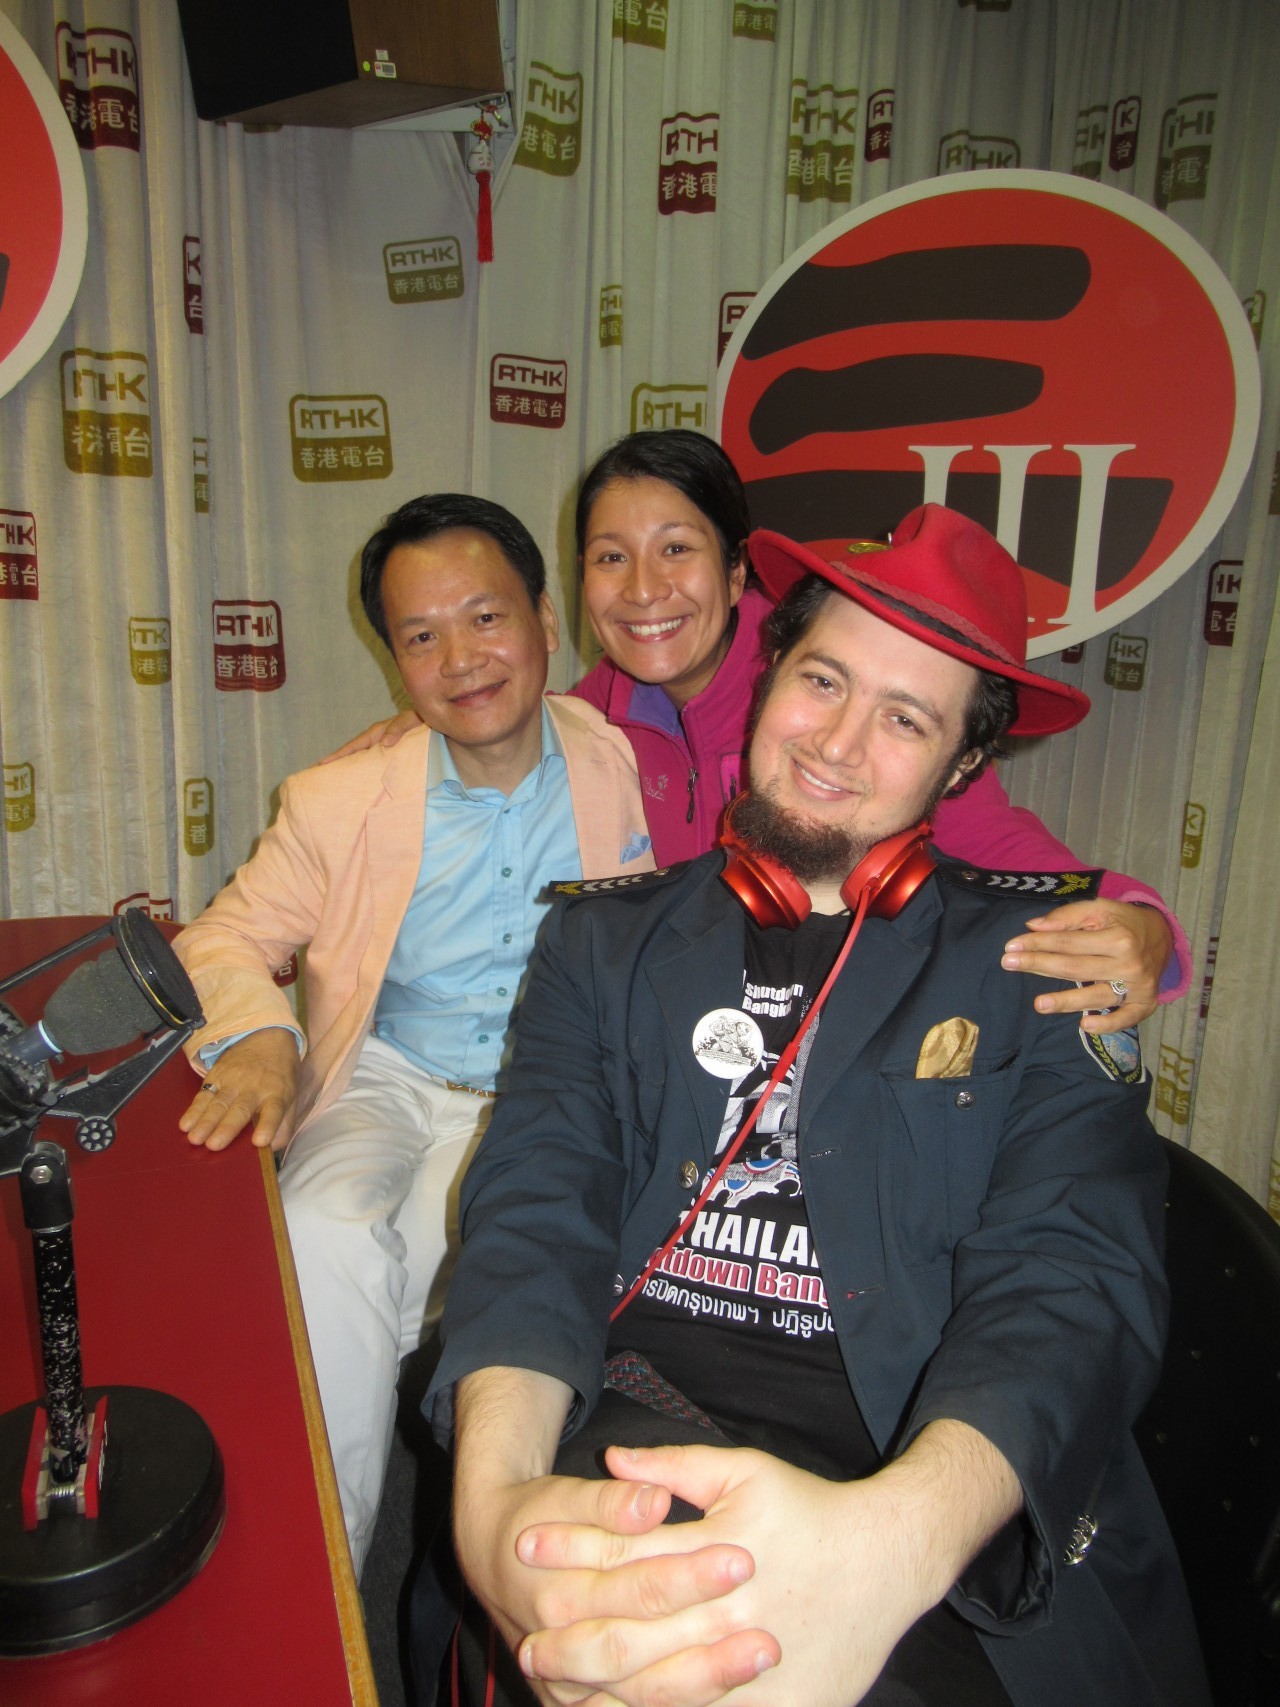 The Record Museum RTHK 3 INTERVIEW